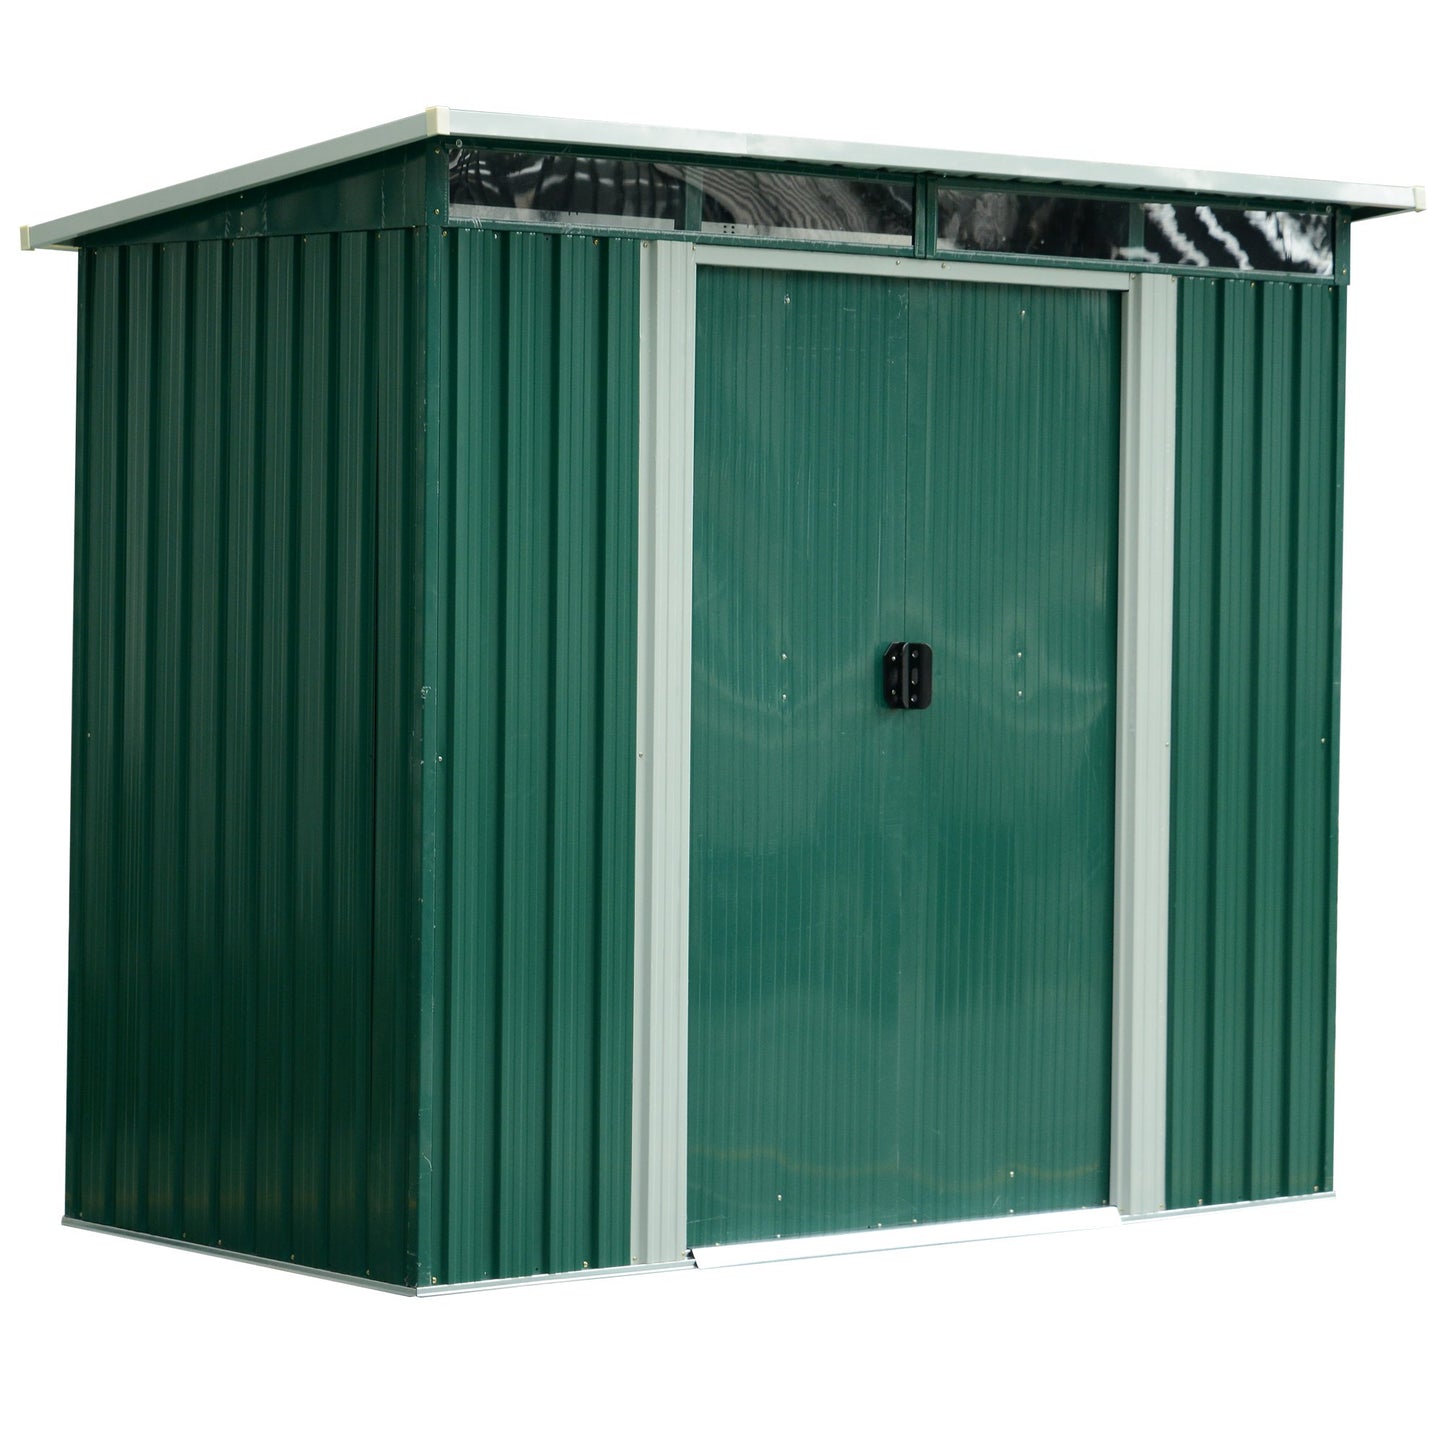 Outsunny 6 x 8ft Corrugated Steel Garden Shed - Green